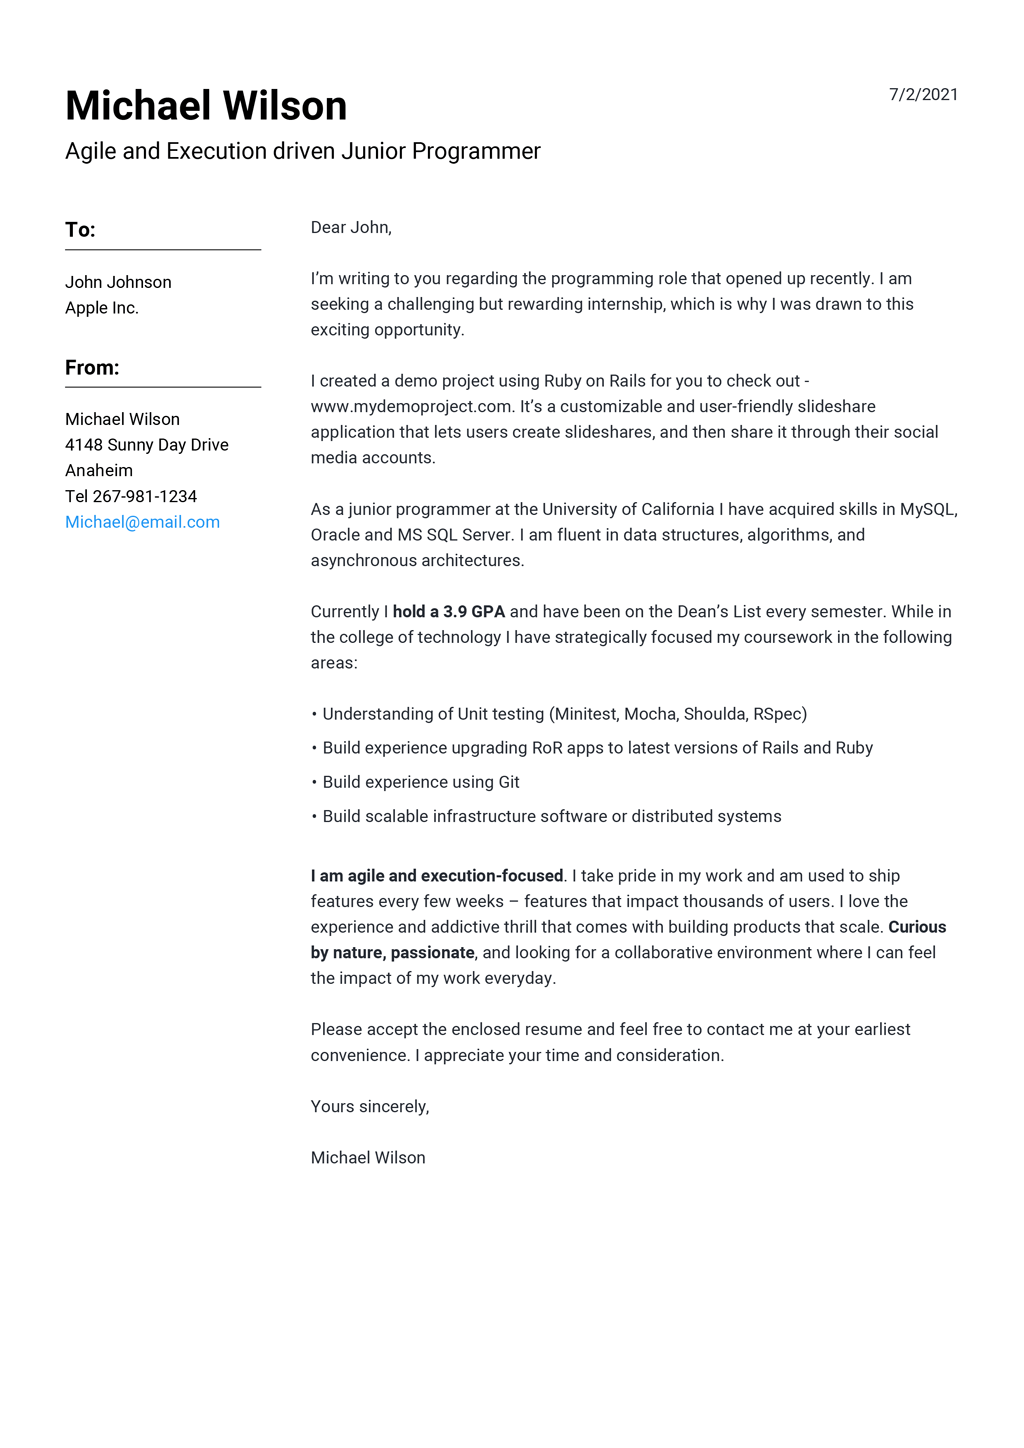 Cover Letter Format Free from jofibo.com